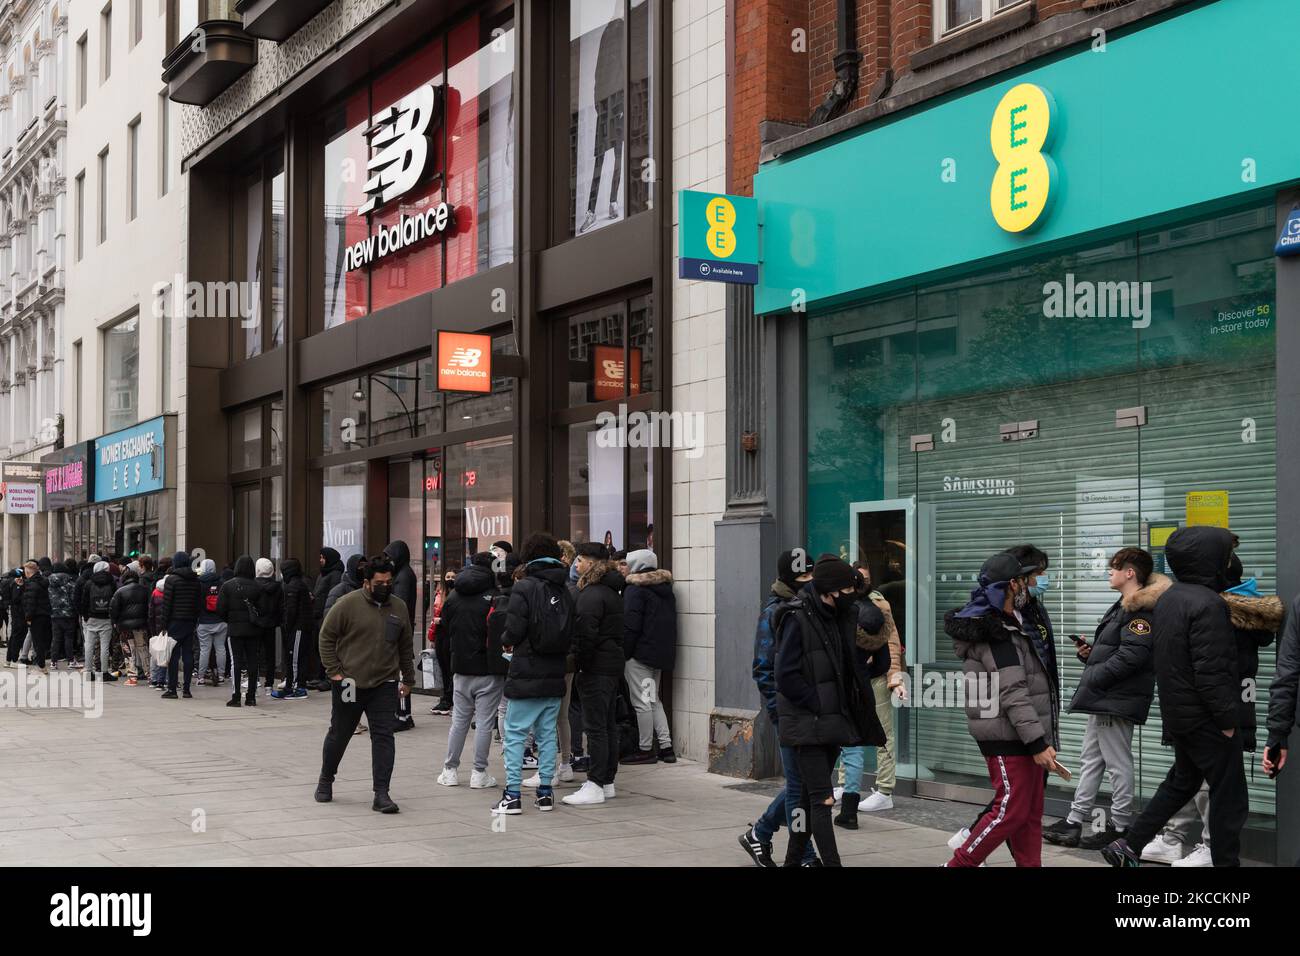 LONDON, UNITED KINGDOM - APRIL 12, 2021: Shoppers queue outside Foot Locker store on Oxford Street as shops open their premises to customers after being closed for over three months under coronavirus lockdown, on 12 April, 2021 in London, England. From today the next stage of lifting lockdown restrictions goes ahead with pubs and restaurants allowed to serve food and drinks outdoors, opening of non-essential shops, hairdressers, beauty salons and gyms in England. (Photo by WIktor Szymanowicz/NurPhoto) Stock Photo